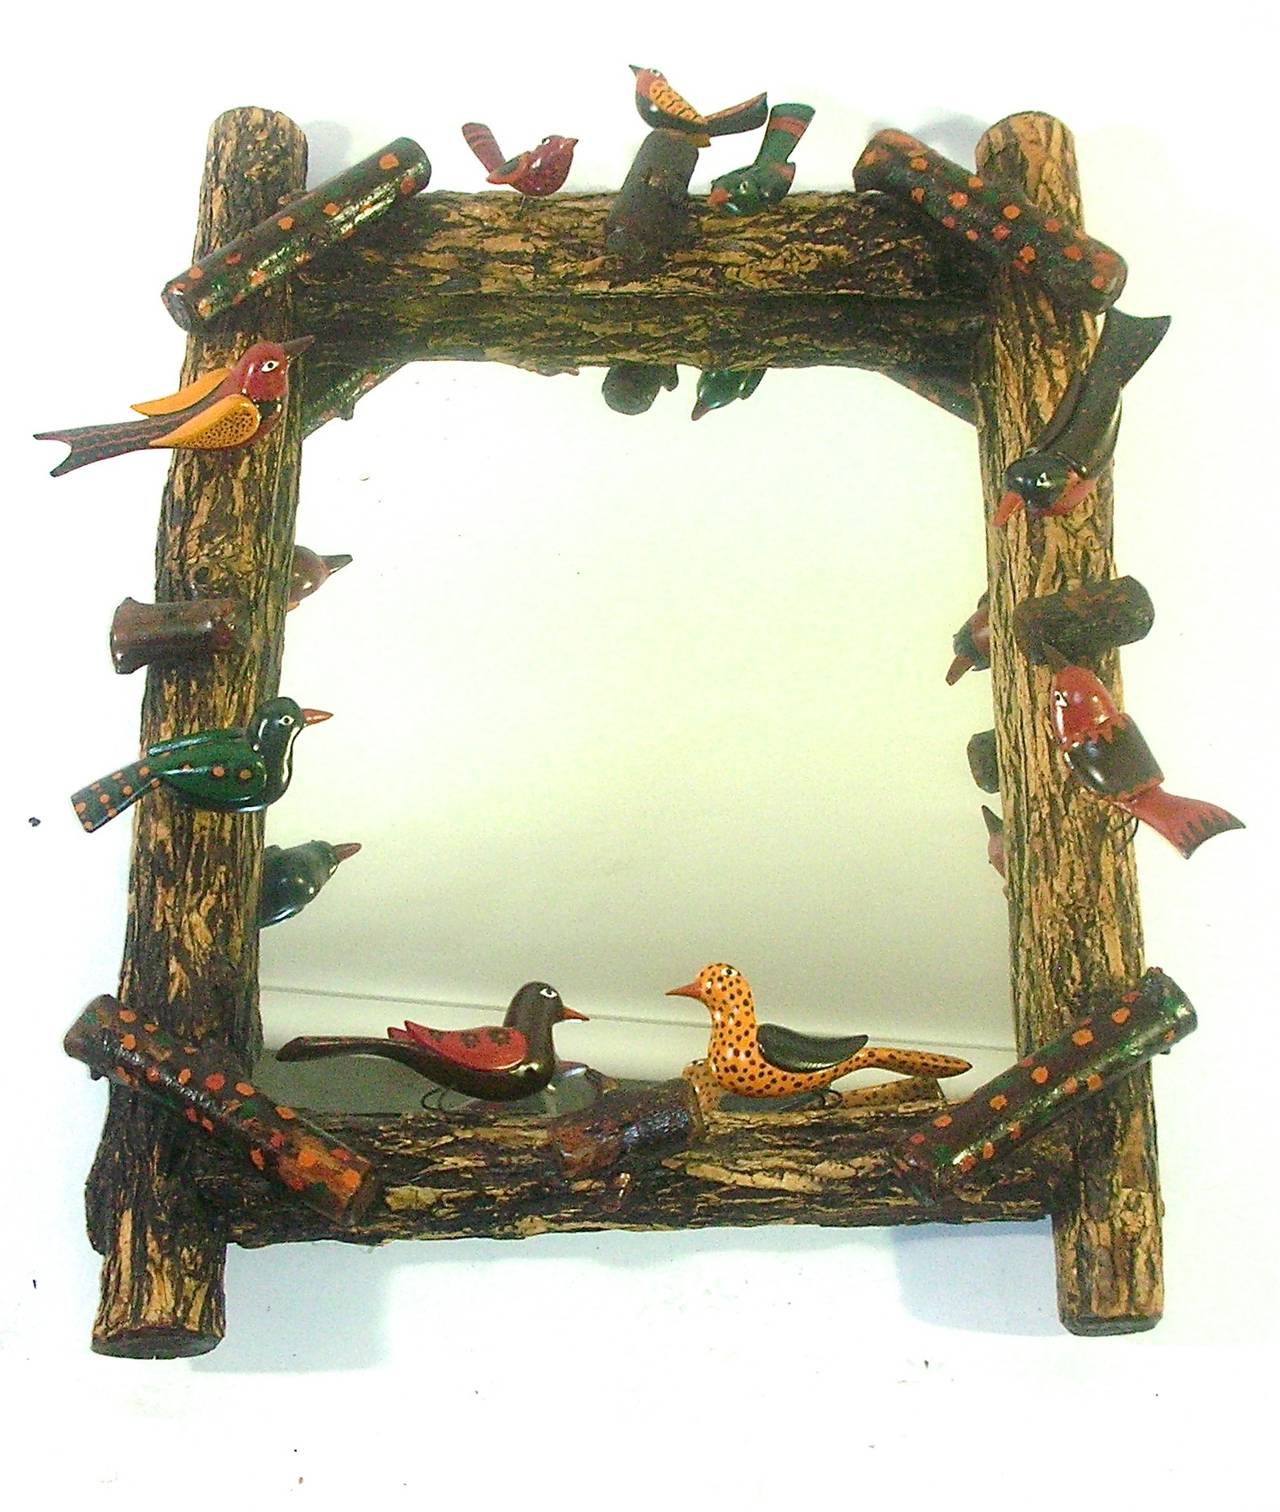 A whimsical example of an American Folk Art mirror and frame. This mirror would be at home in any design environment, the hand-carved variety of birds are cheerfully finished with a strong paint color palette. The spindly wire form bird legs add to